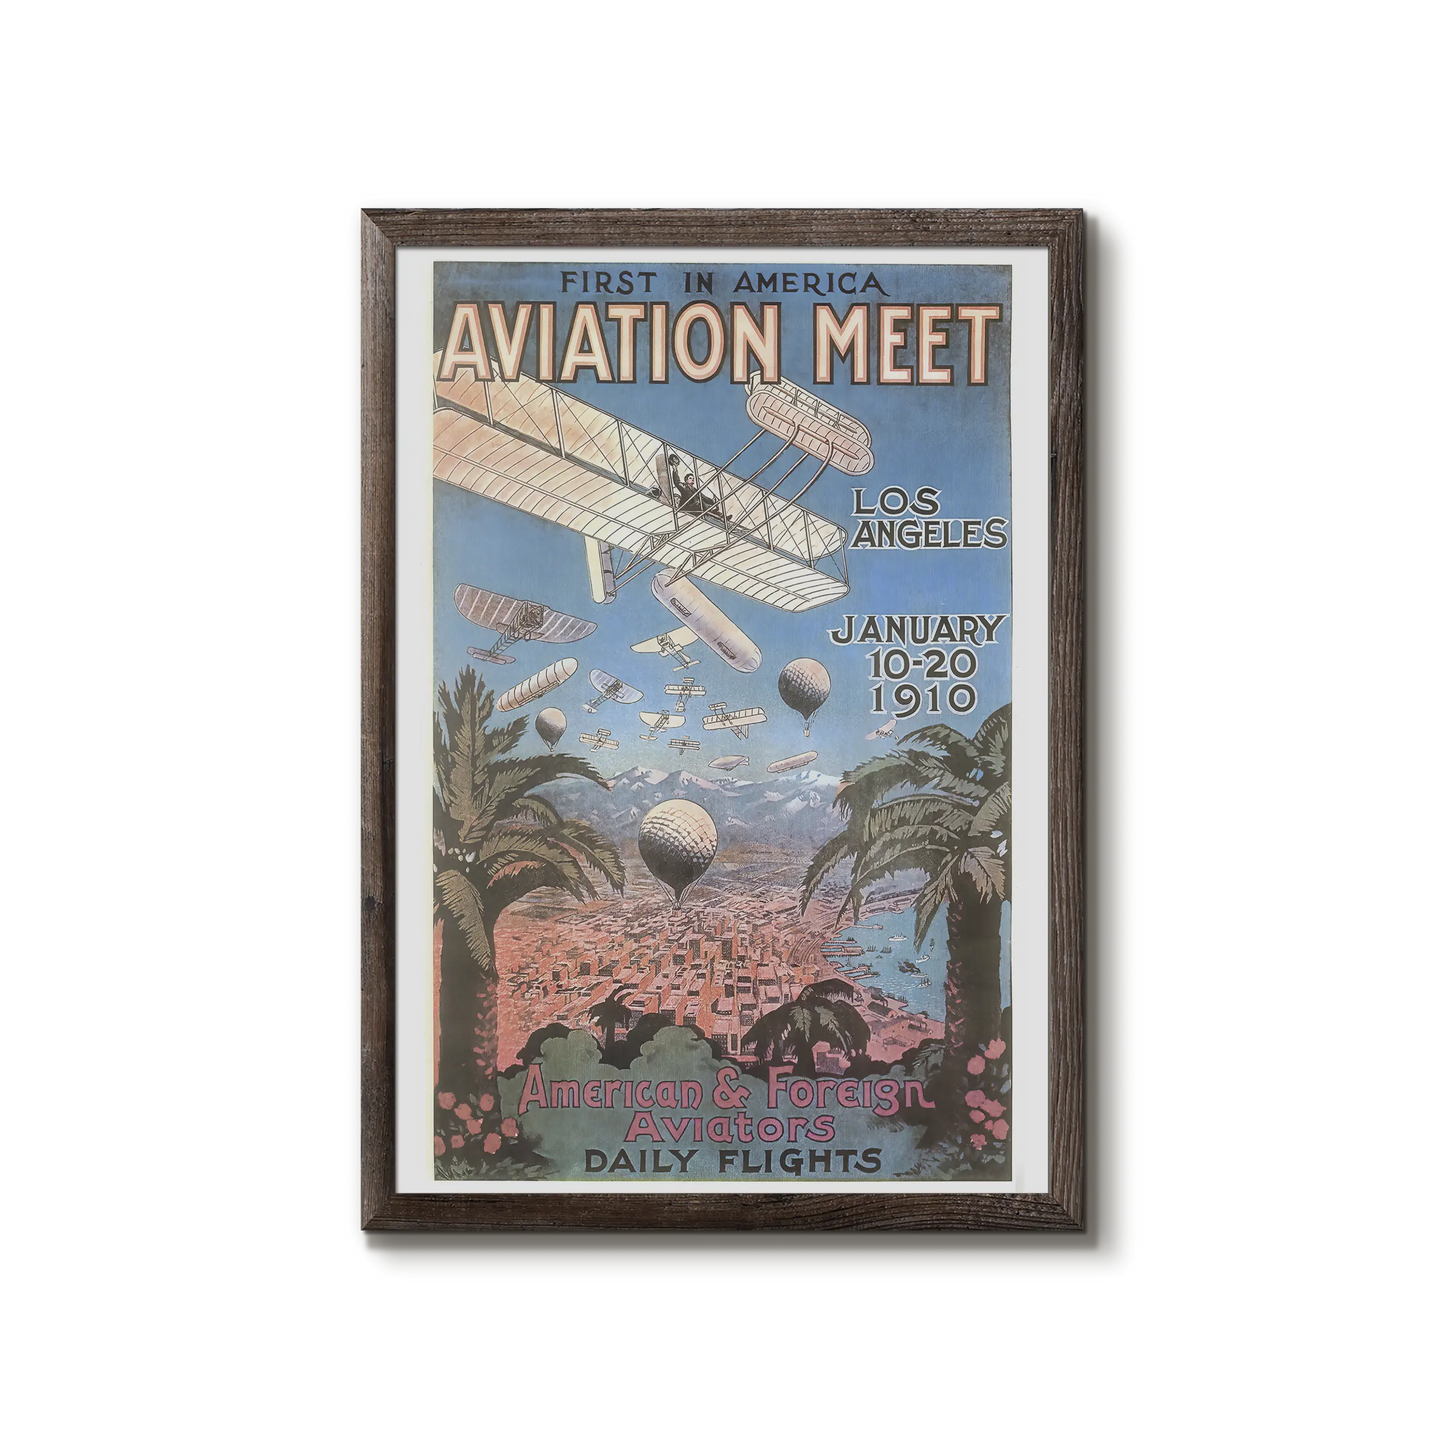 Aviation history poster featuring the Los Angeles International Air Meet at Dominguez 1910